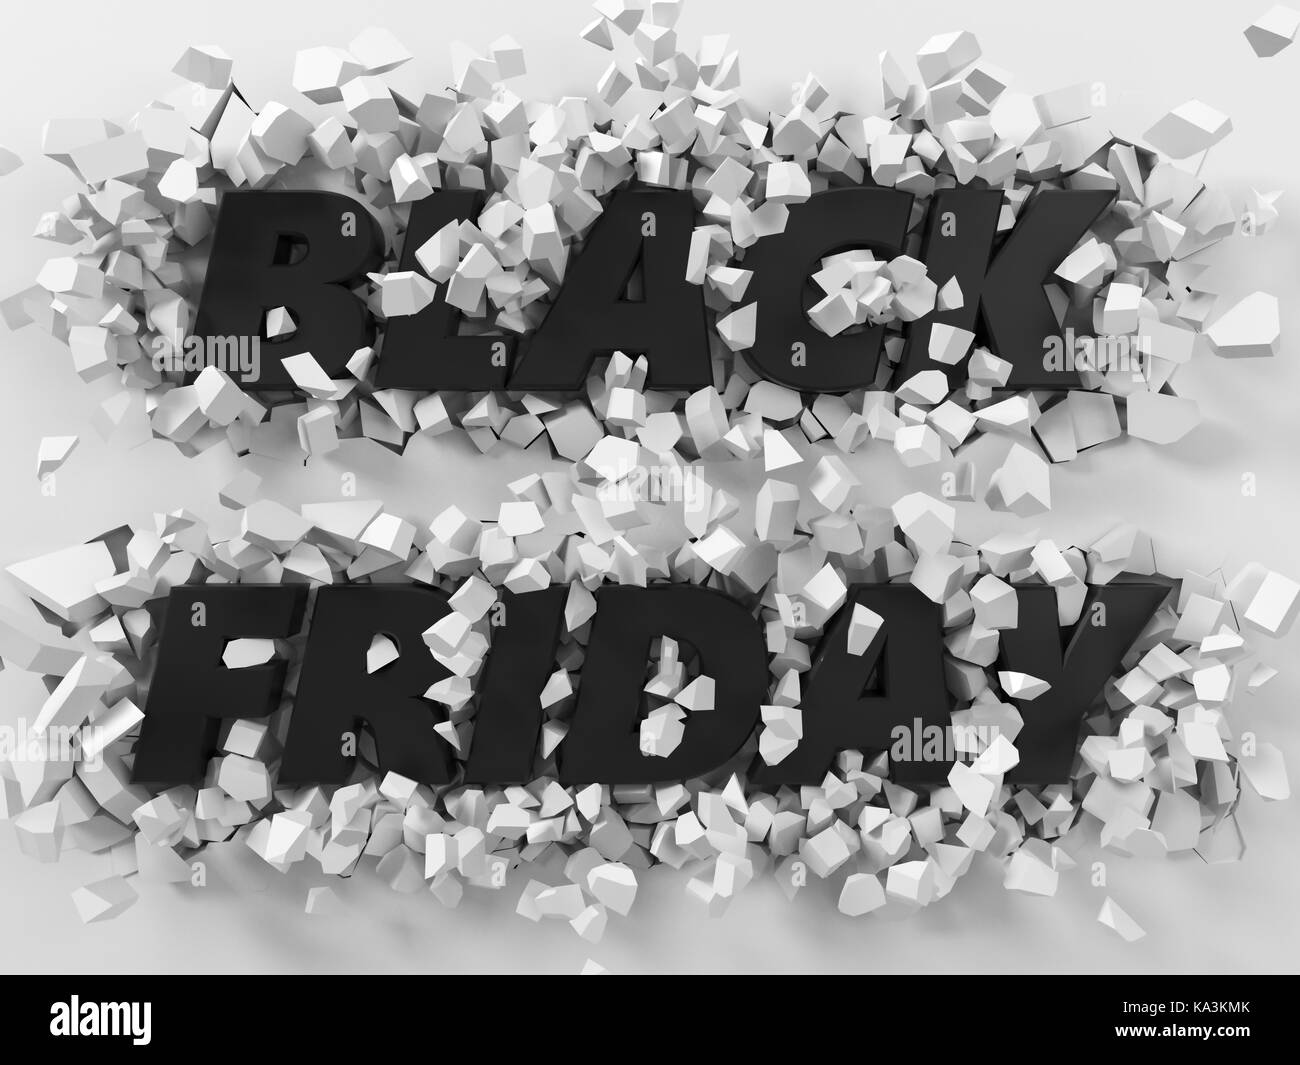 black friday text and exploding background.d illustration. suitable for any blackfriday theme. Stock Photo